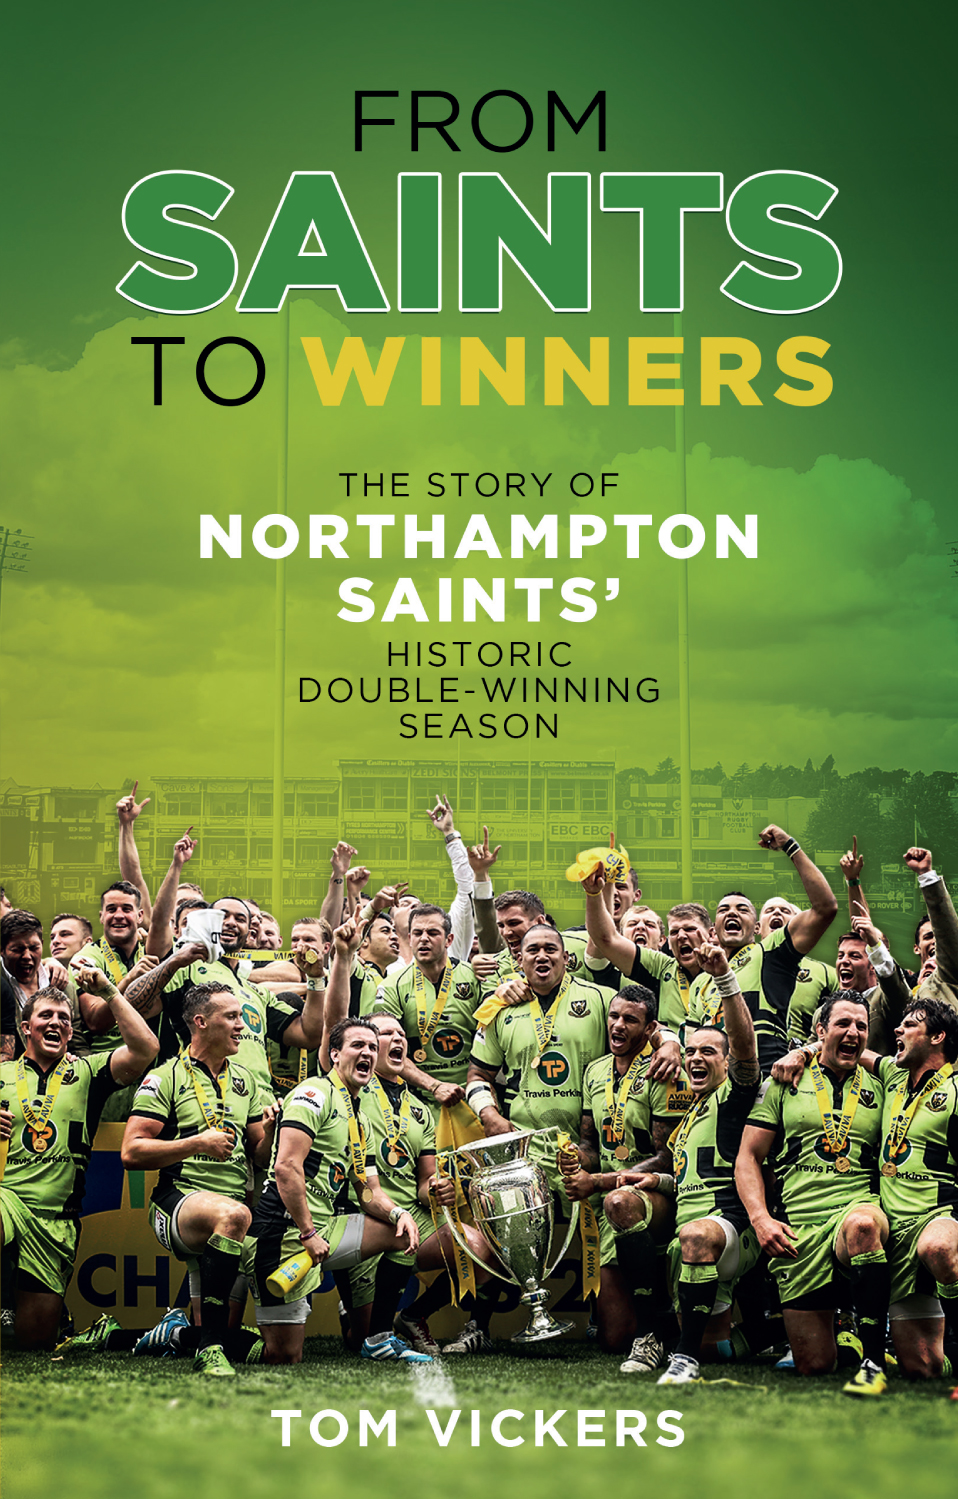 From Saints to Winners